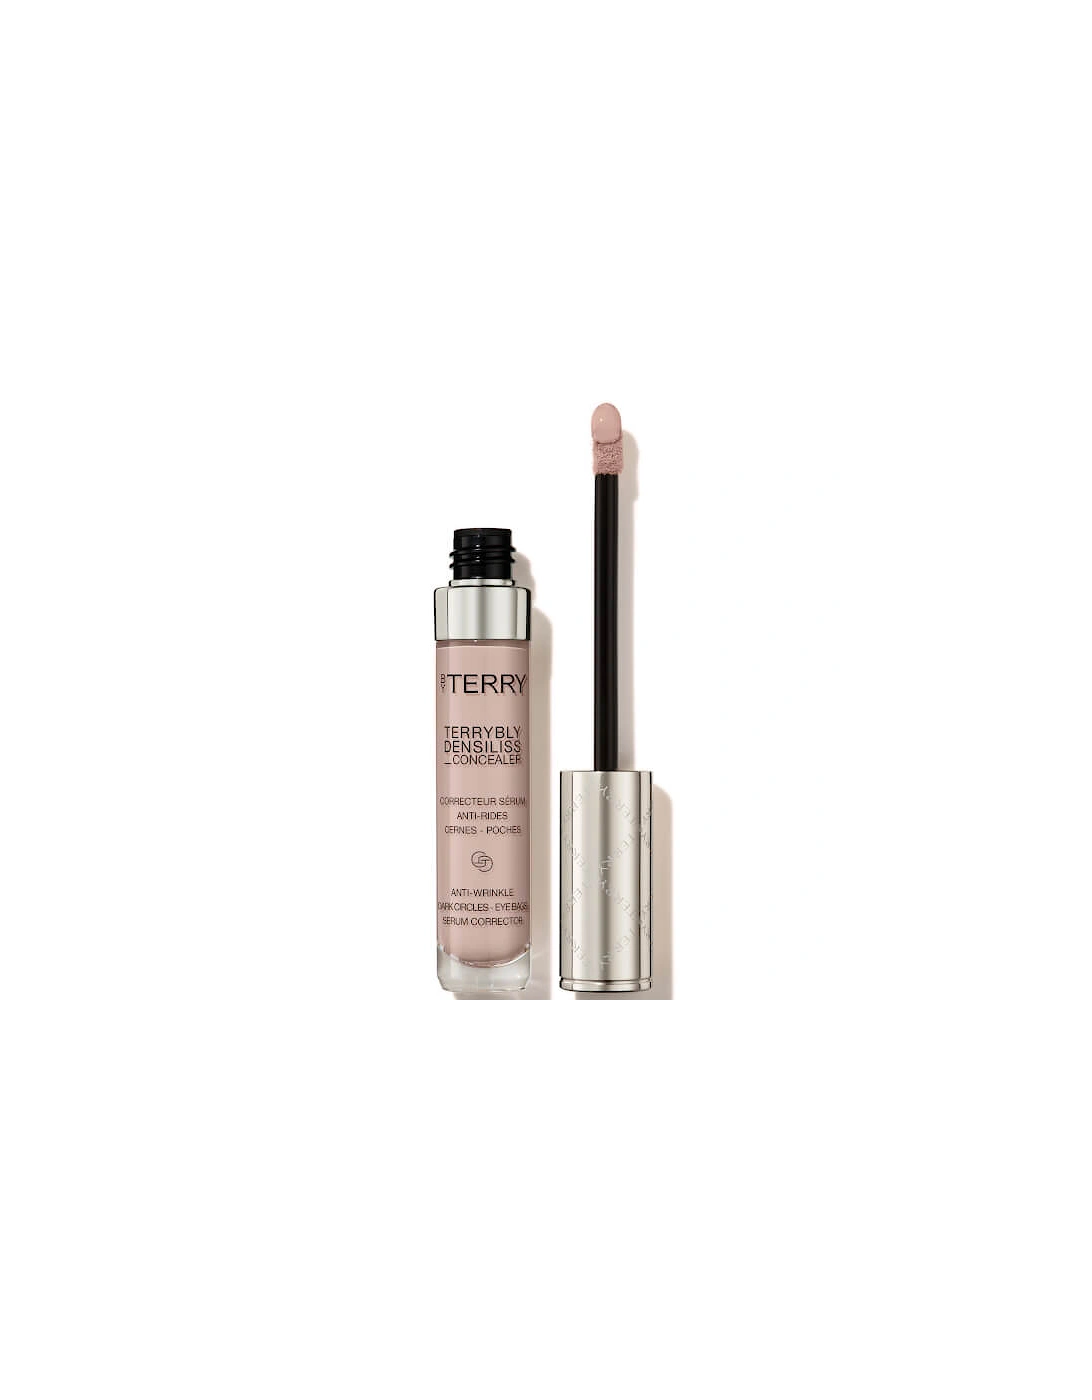 By Terry Terrybly Densiliss Concealer -1. Fresh Fair - By Terry - By Terry Terrybly Densiliss Concealer -1. Fresh Fair - By Terry Terrybly Densiliss Concealer -2. Vanilla Beige - By Terry Terrybly Densiliss Concealer -3. Natural Beige - By Terry Terrybly Densiliss Concealer -4. Medium Peach - By Terry Terrybly Densiliss Concealer -5. Desert Beige - By Terry Terrybly Densiliss Concealer -6. Sienna Copper, 2 of 1